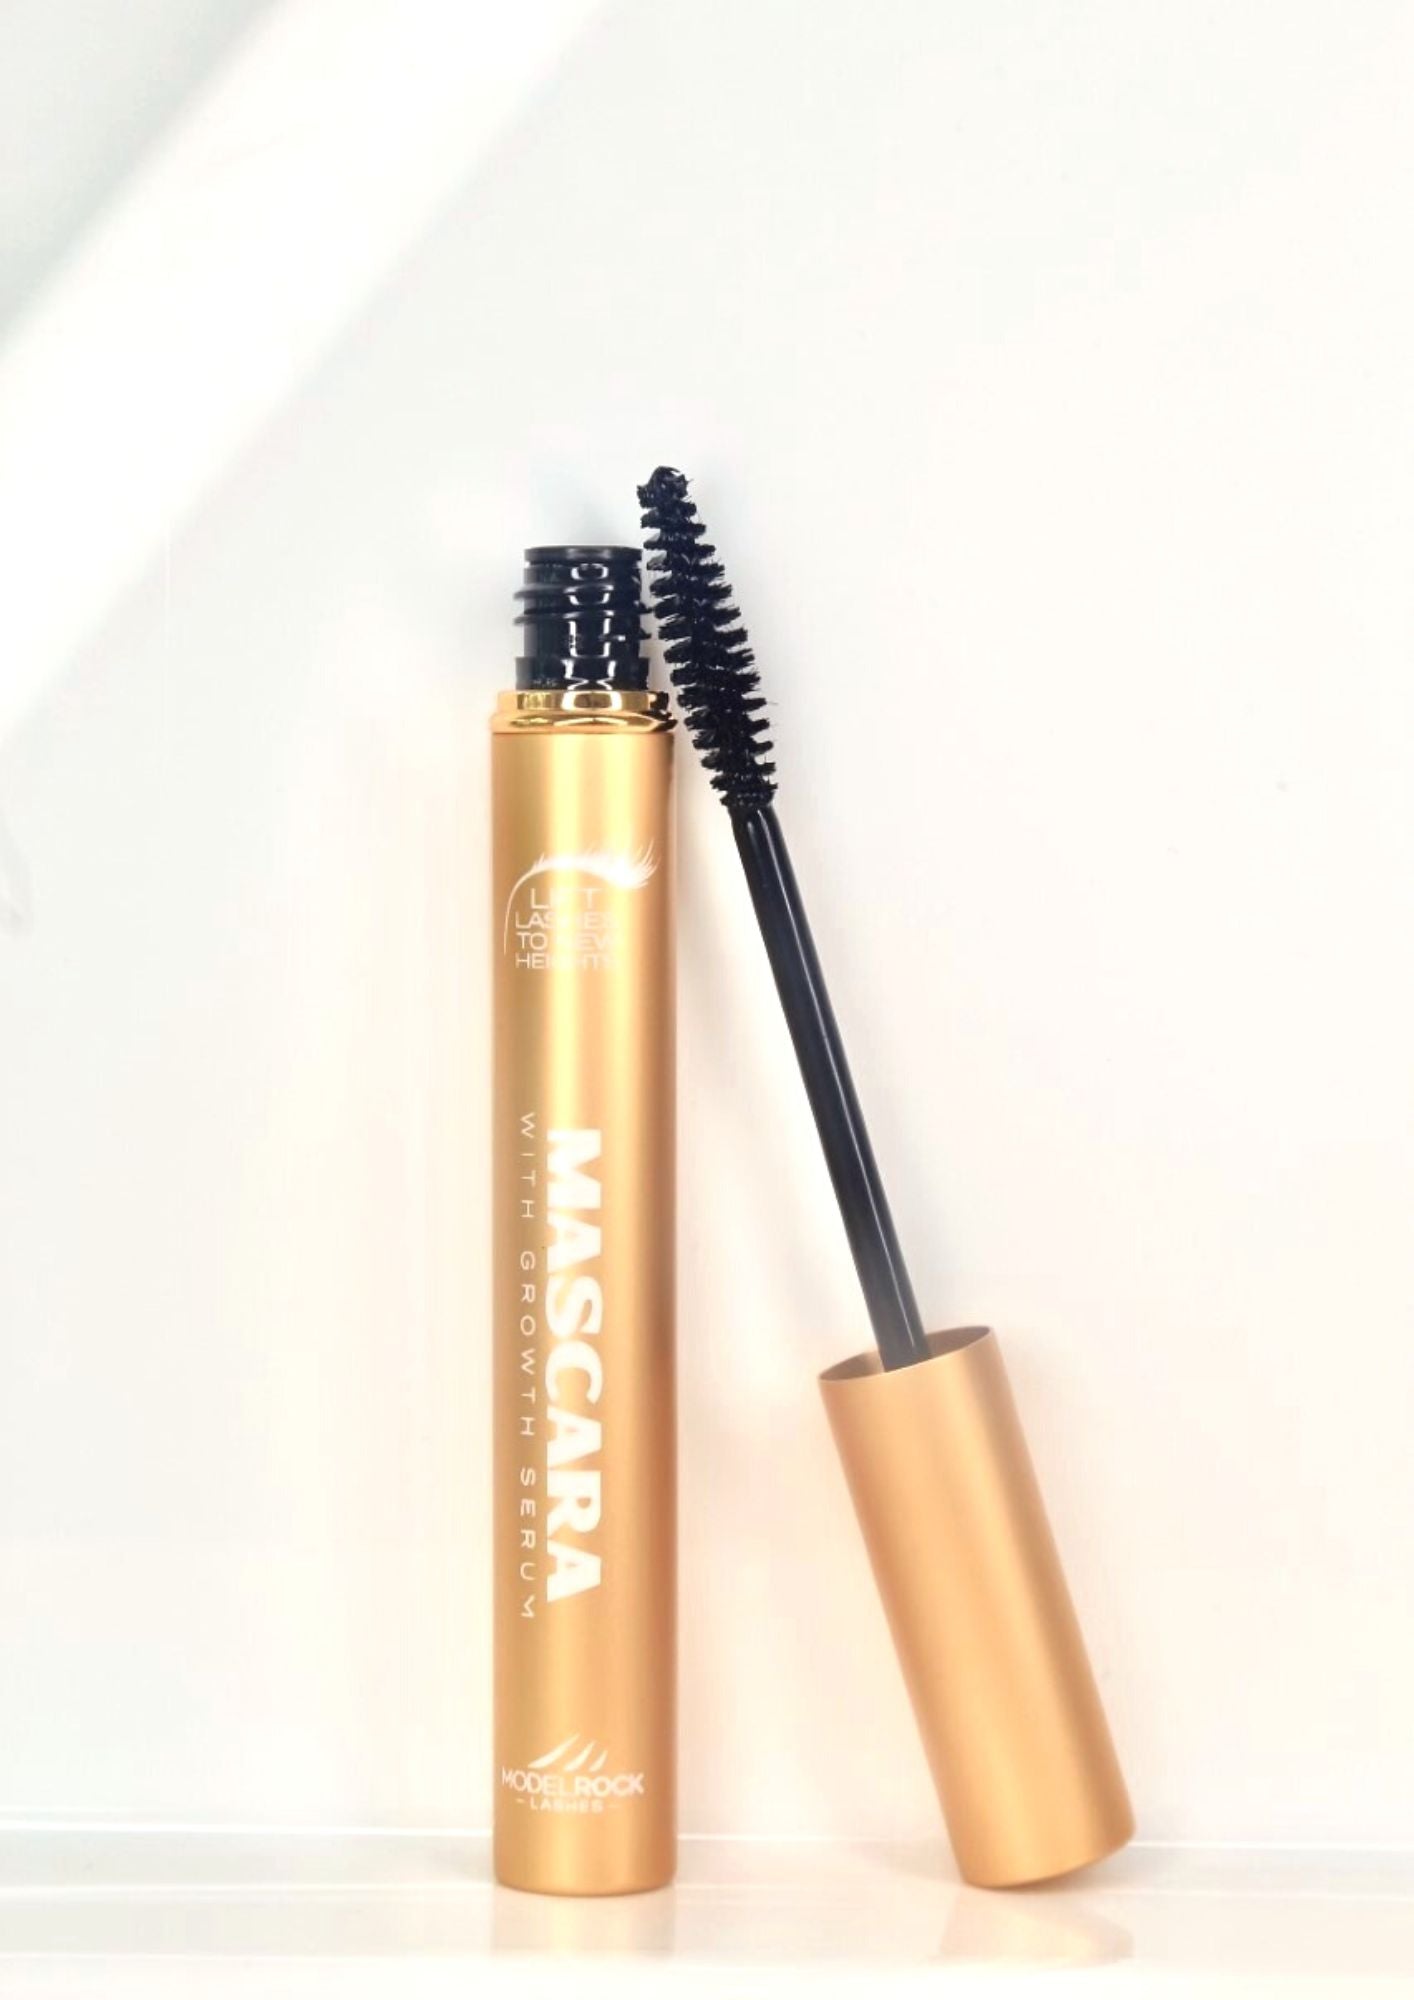 Modelrock - Mascara Extreme Longwear Infused with Growth Serum